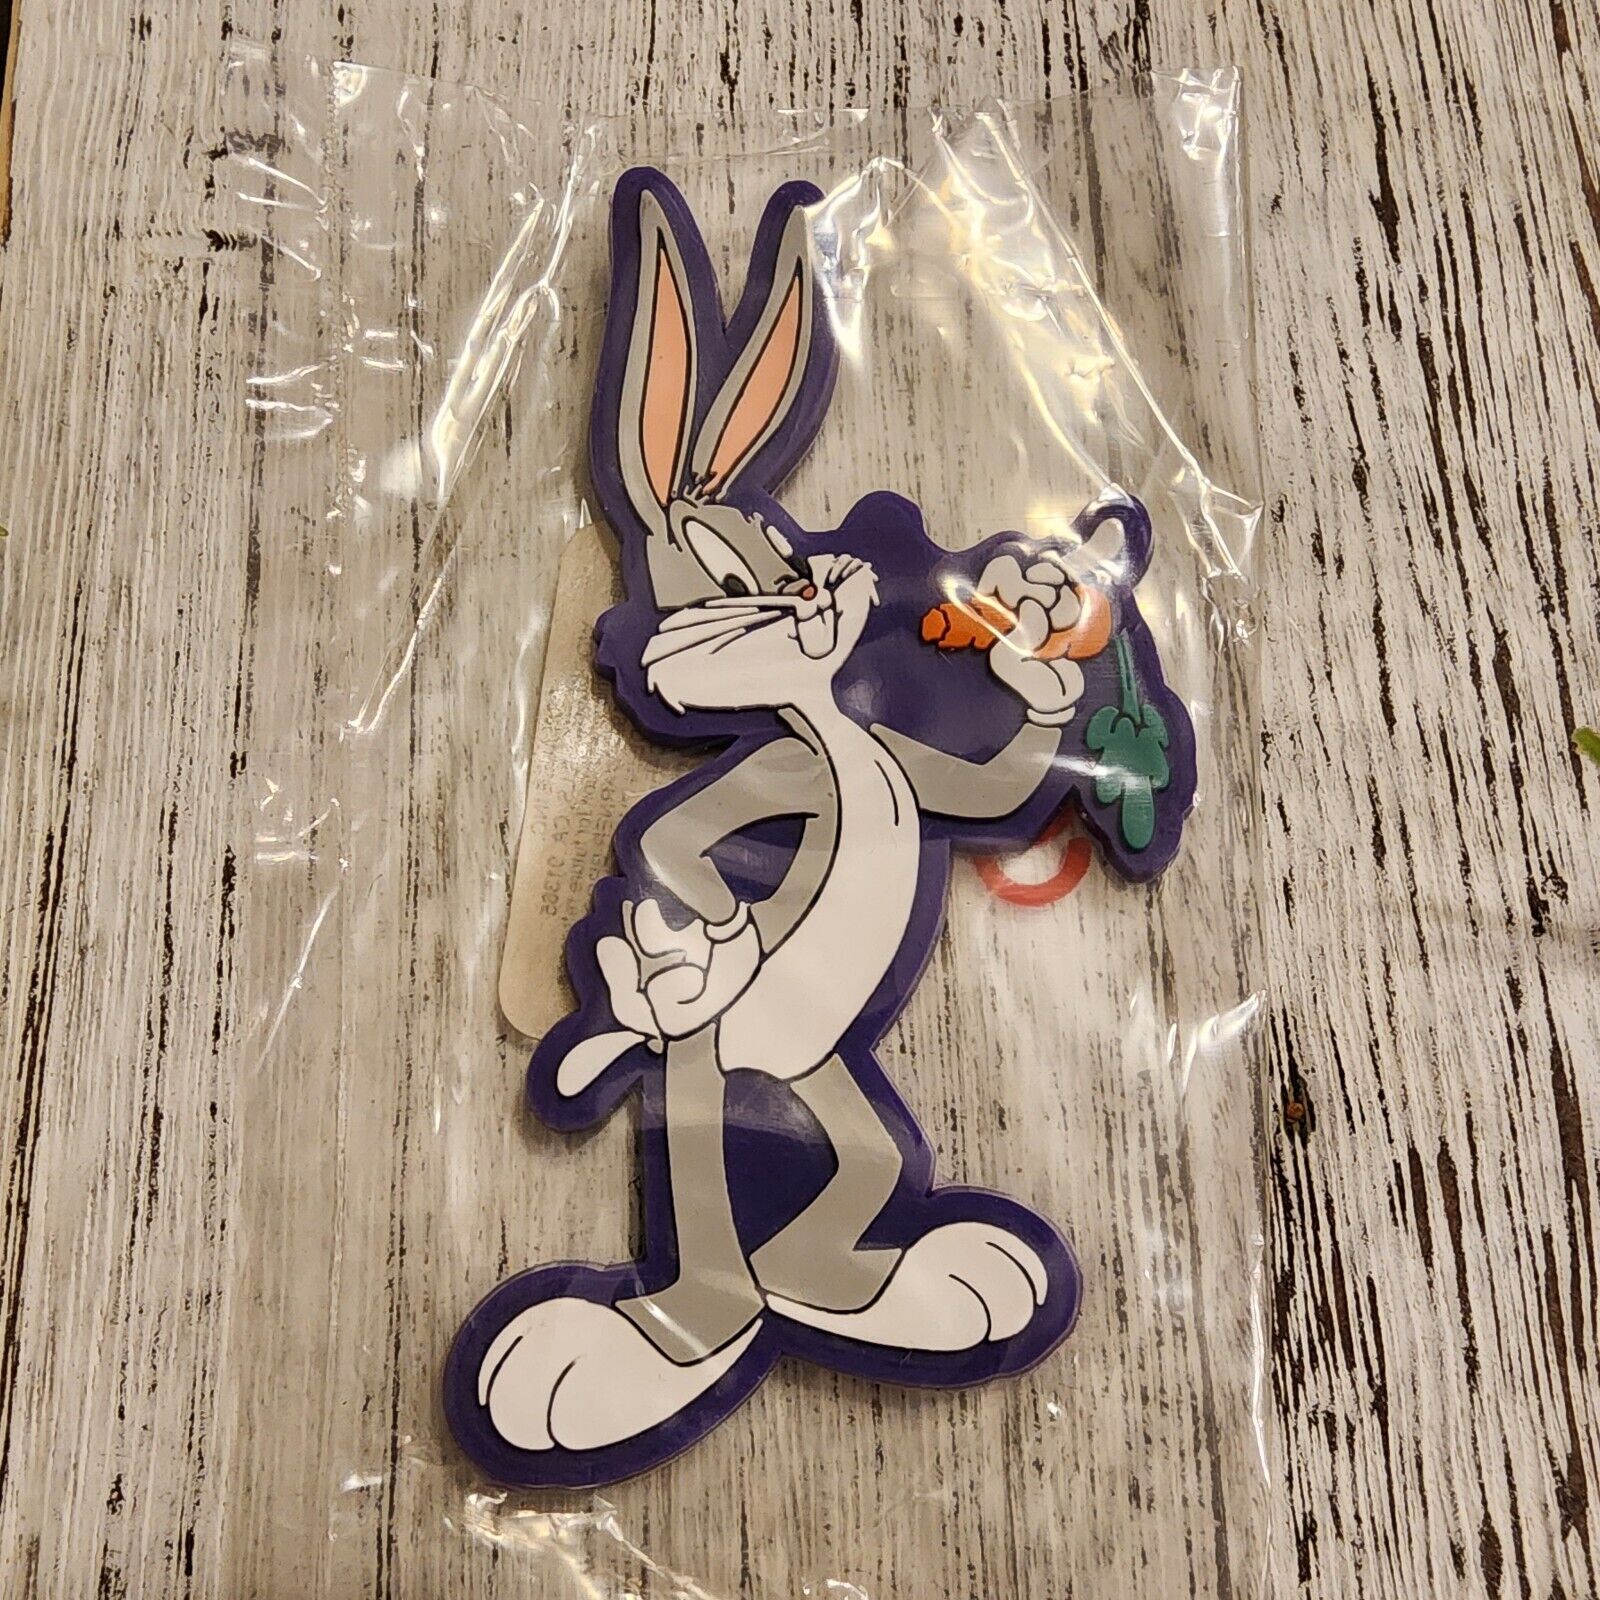 Warner Brothers Applause LOONEY TUNES Bugs BUNNY Rubber Refrigerator Magnet 90s 